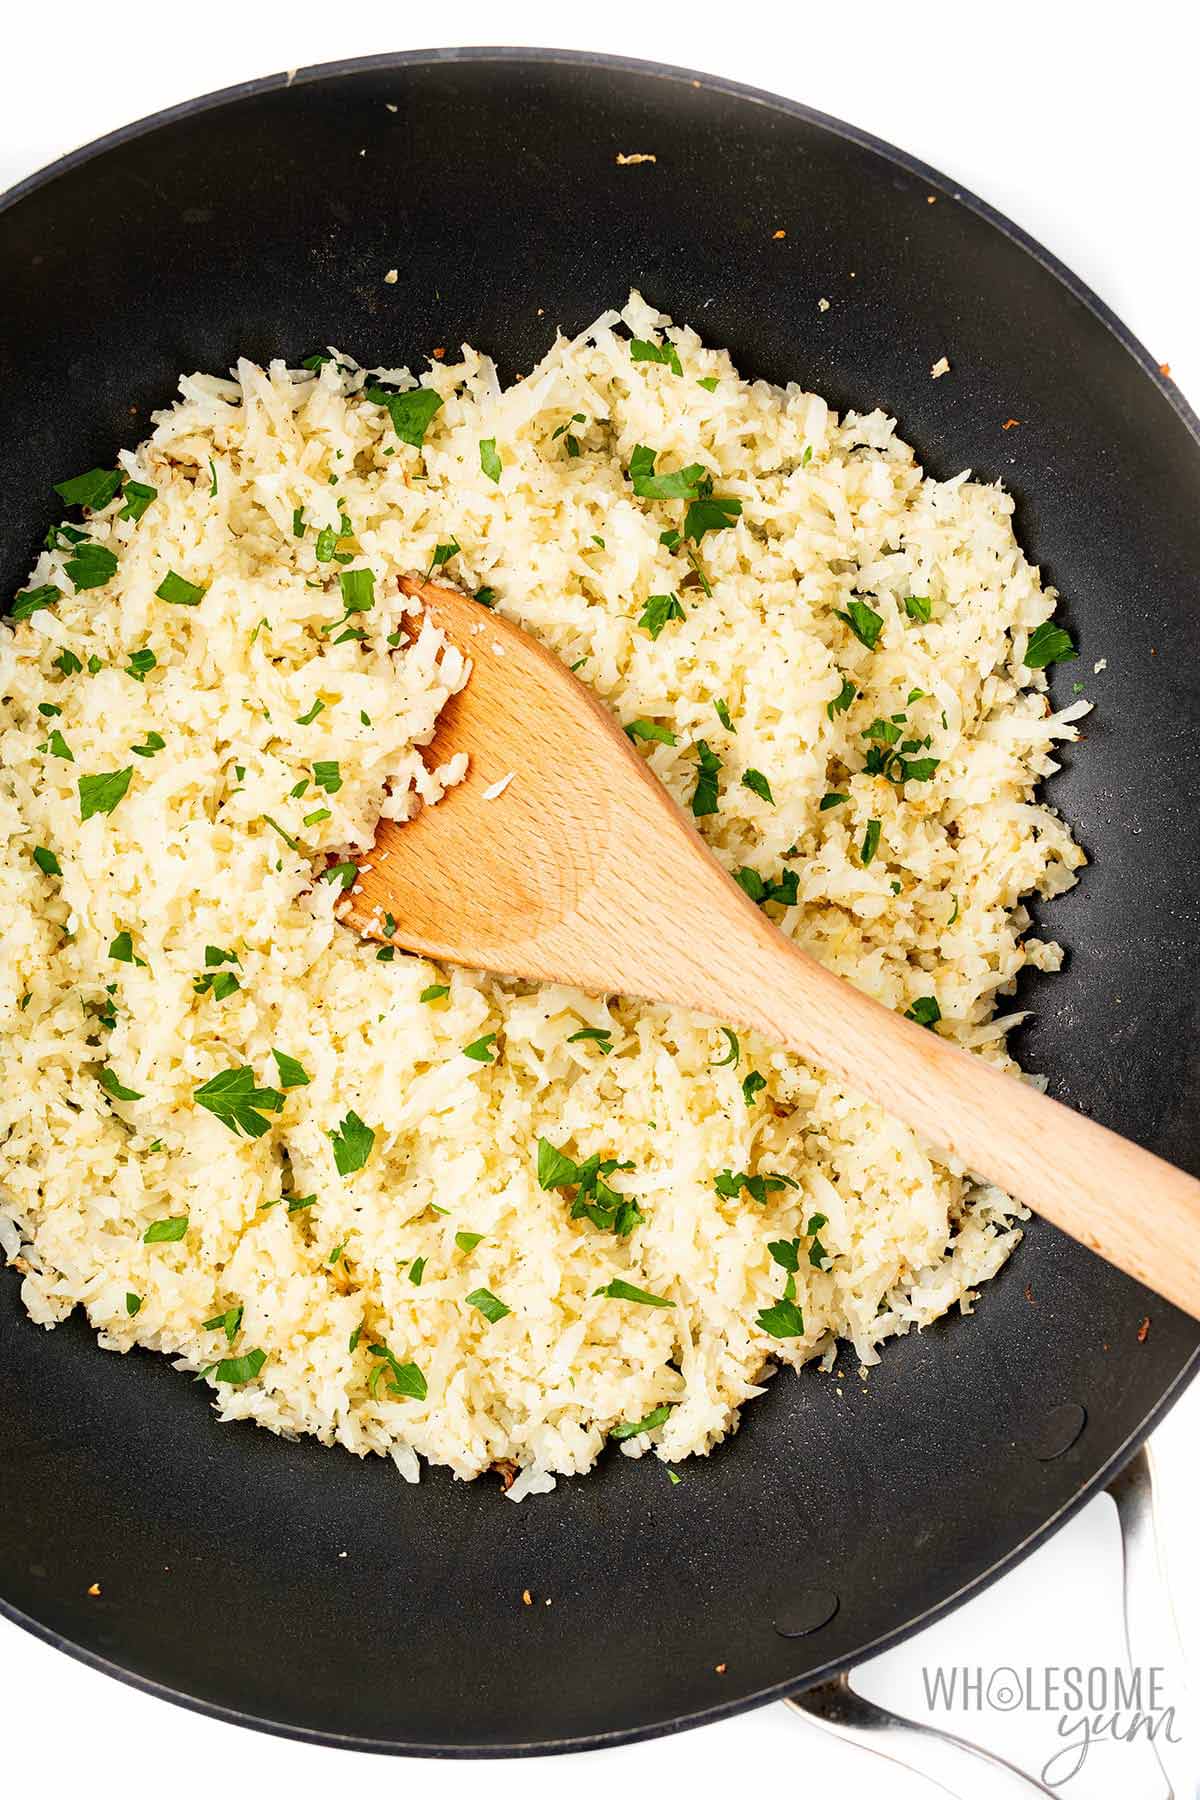 Cooked cauliflower rice in a skillet.